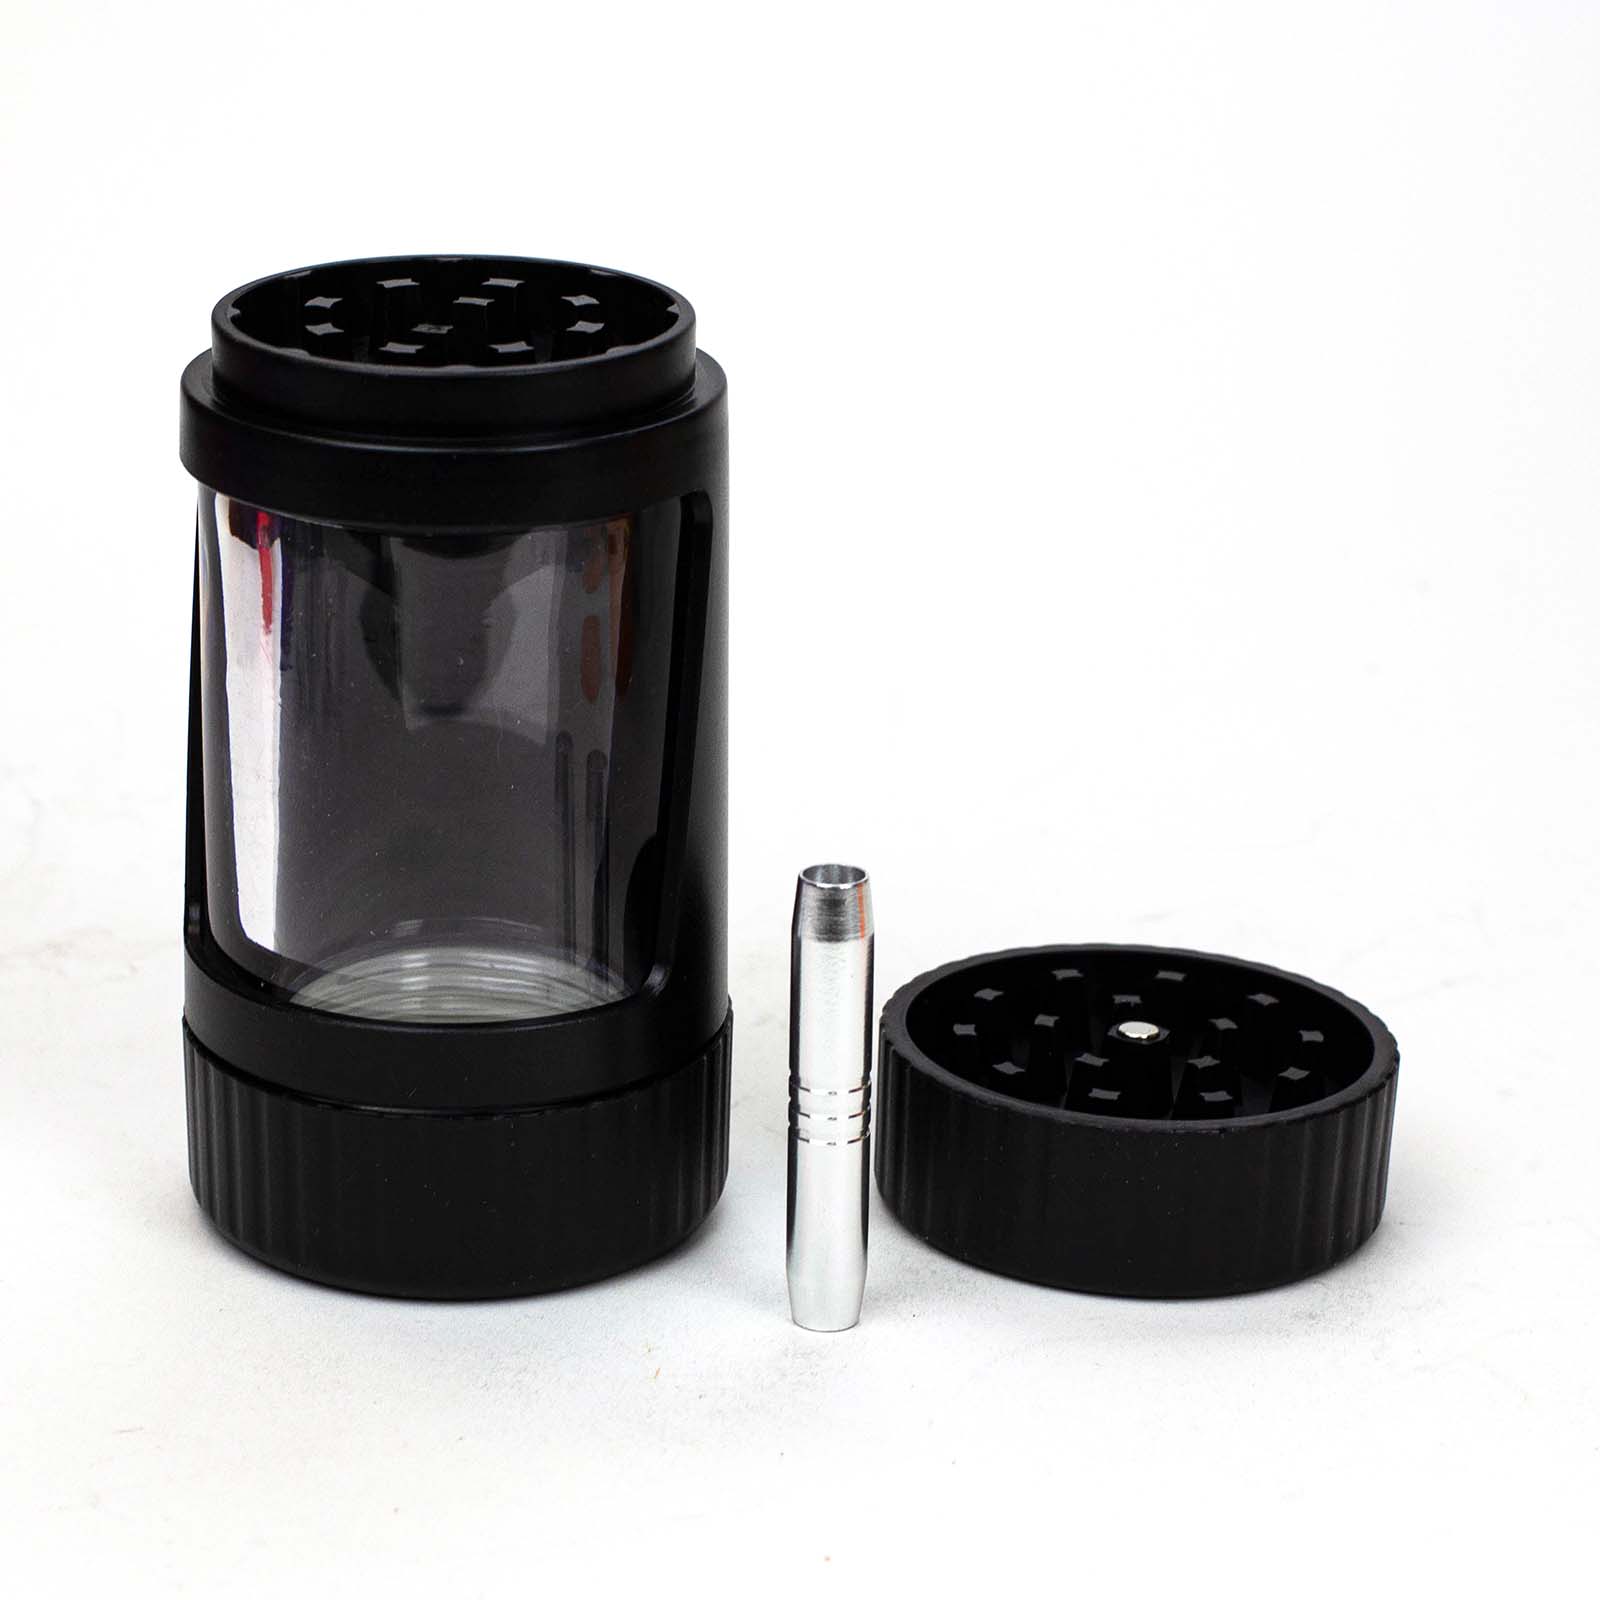 4-in-1 LED Magnify Jar with a grinder and one hitter